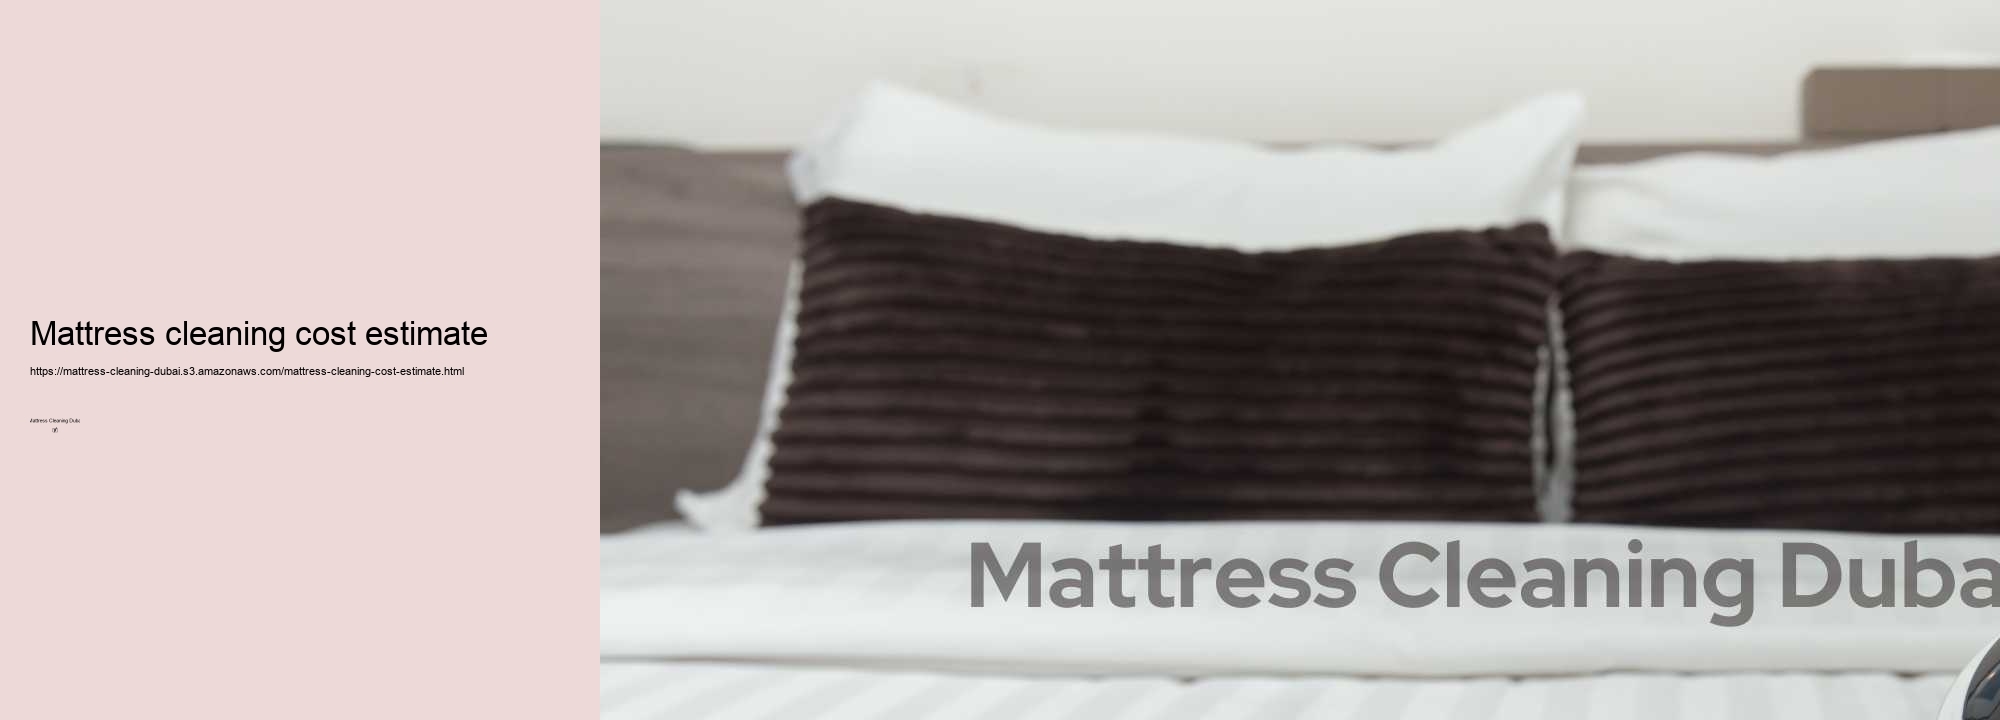 Mattress cleaning cost estimate